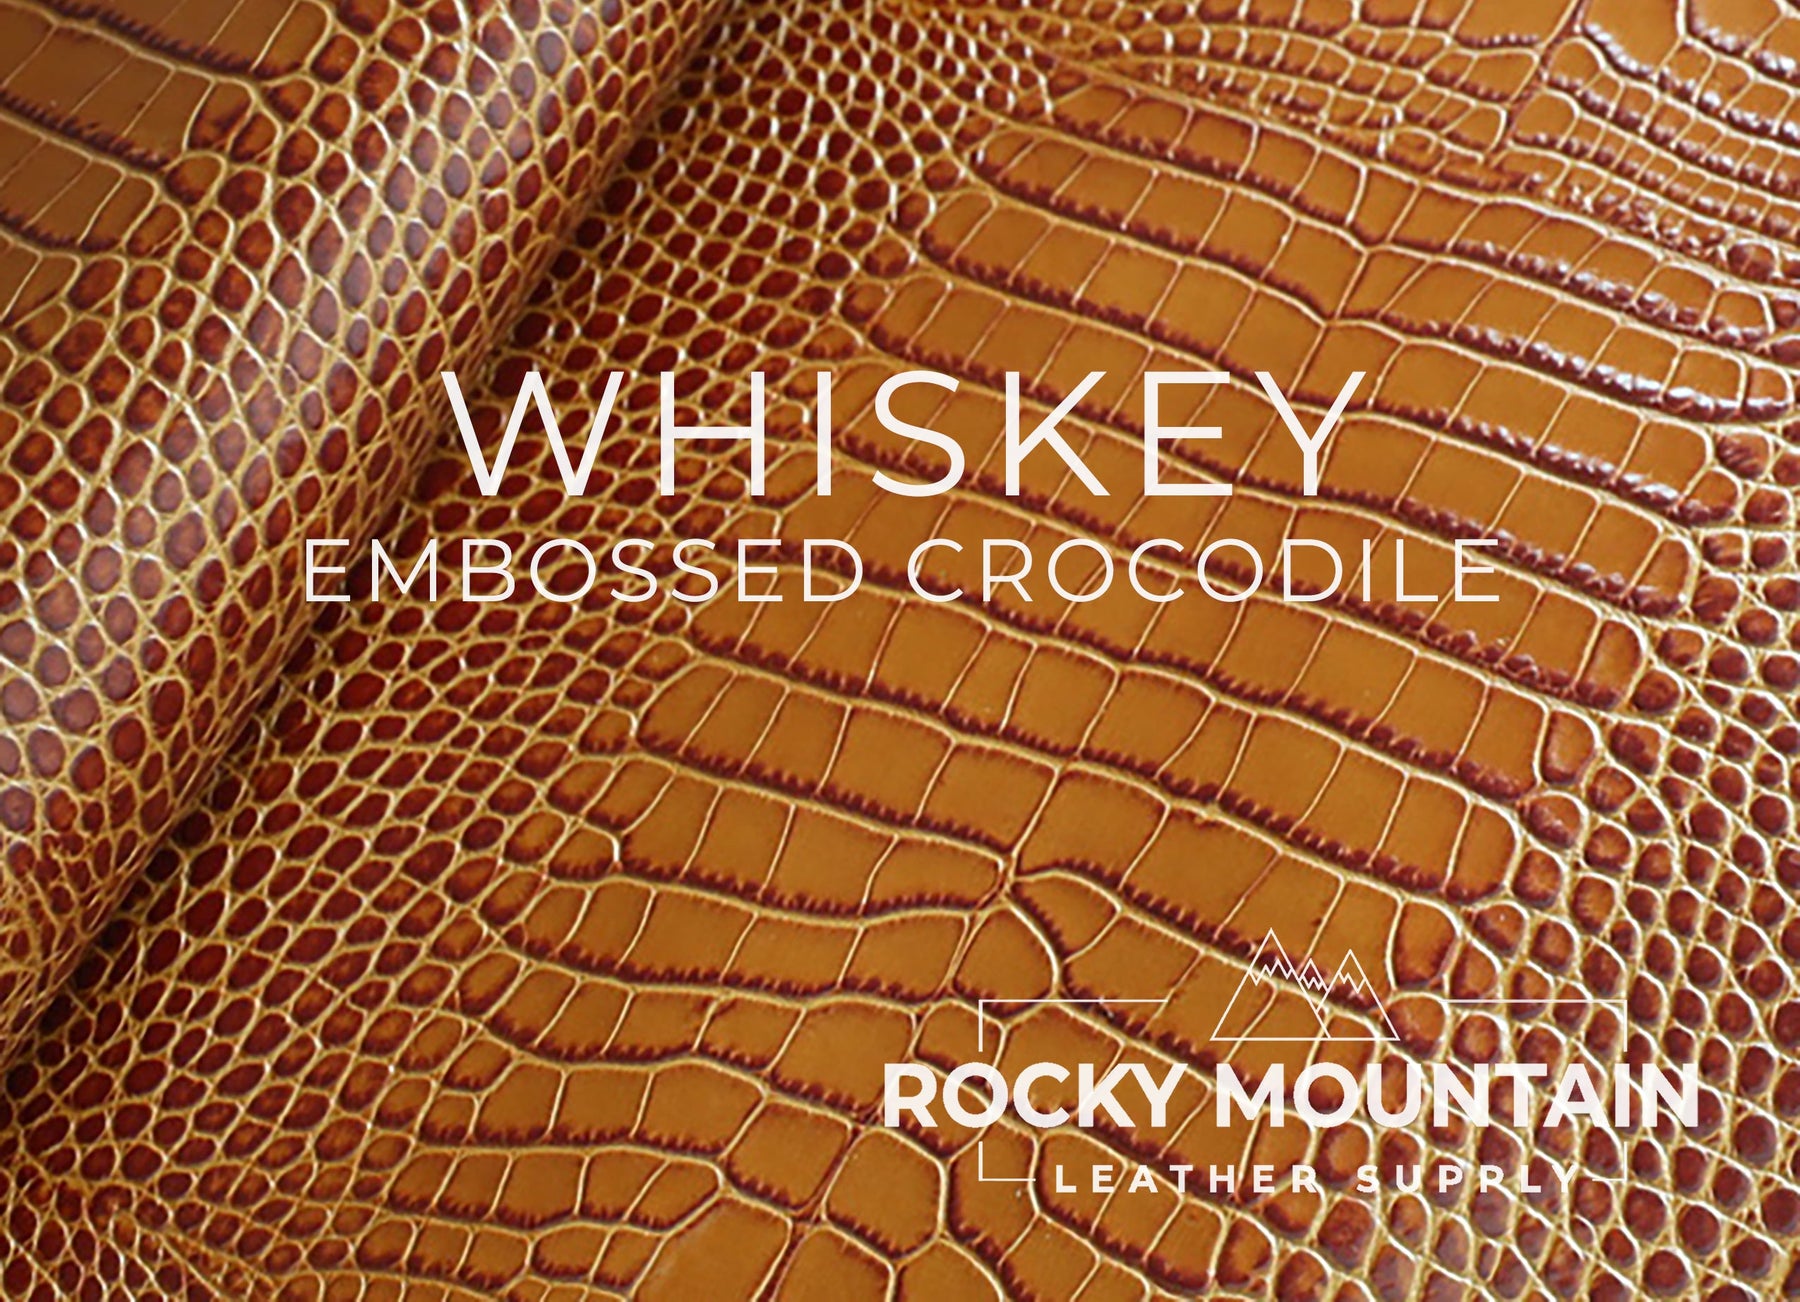 Exotic crocodile leather tanning and finishes in luxury leather